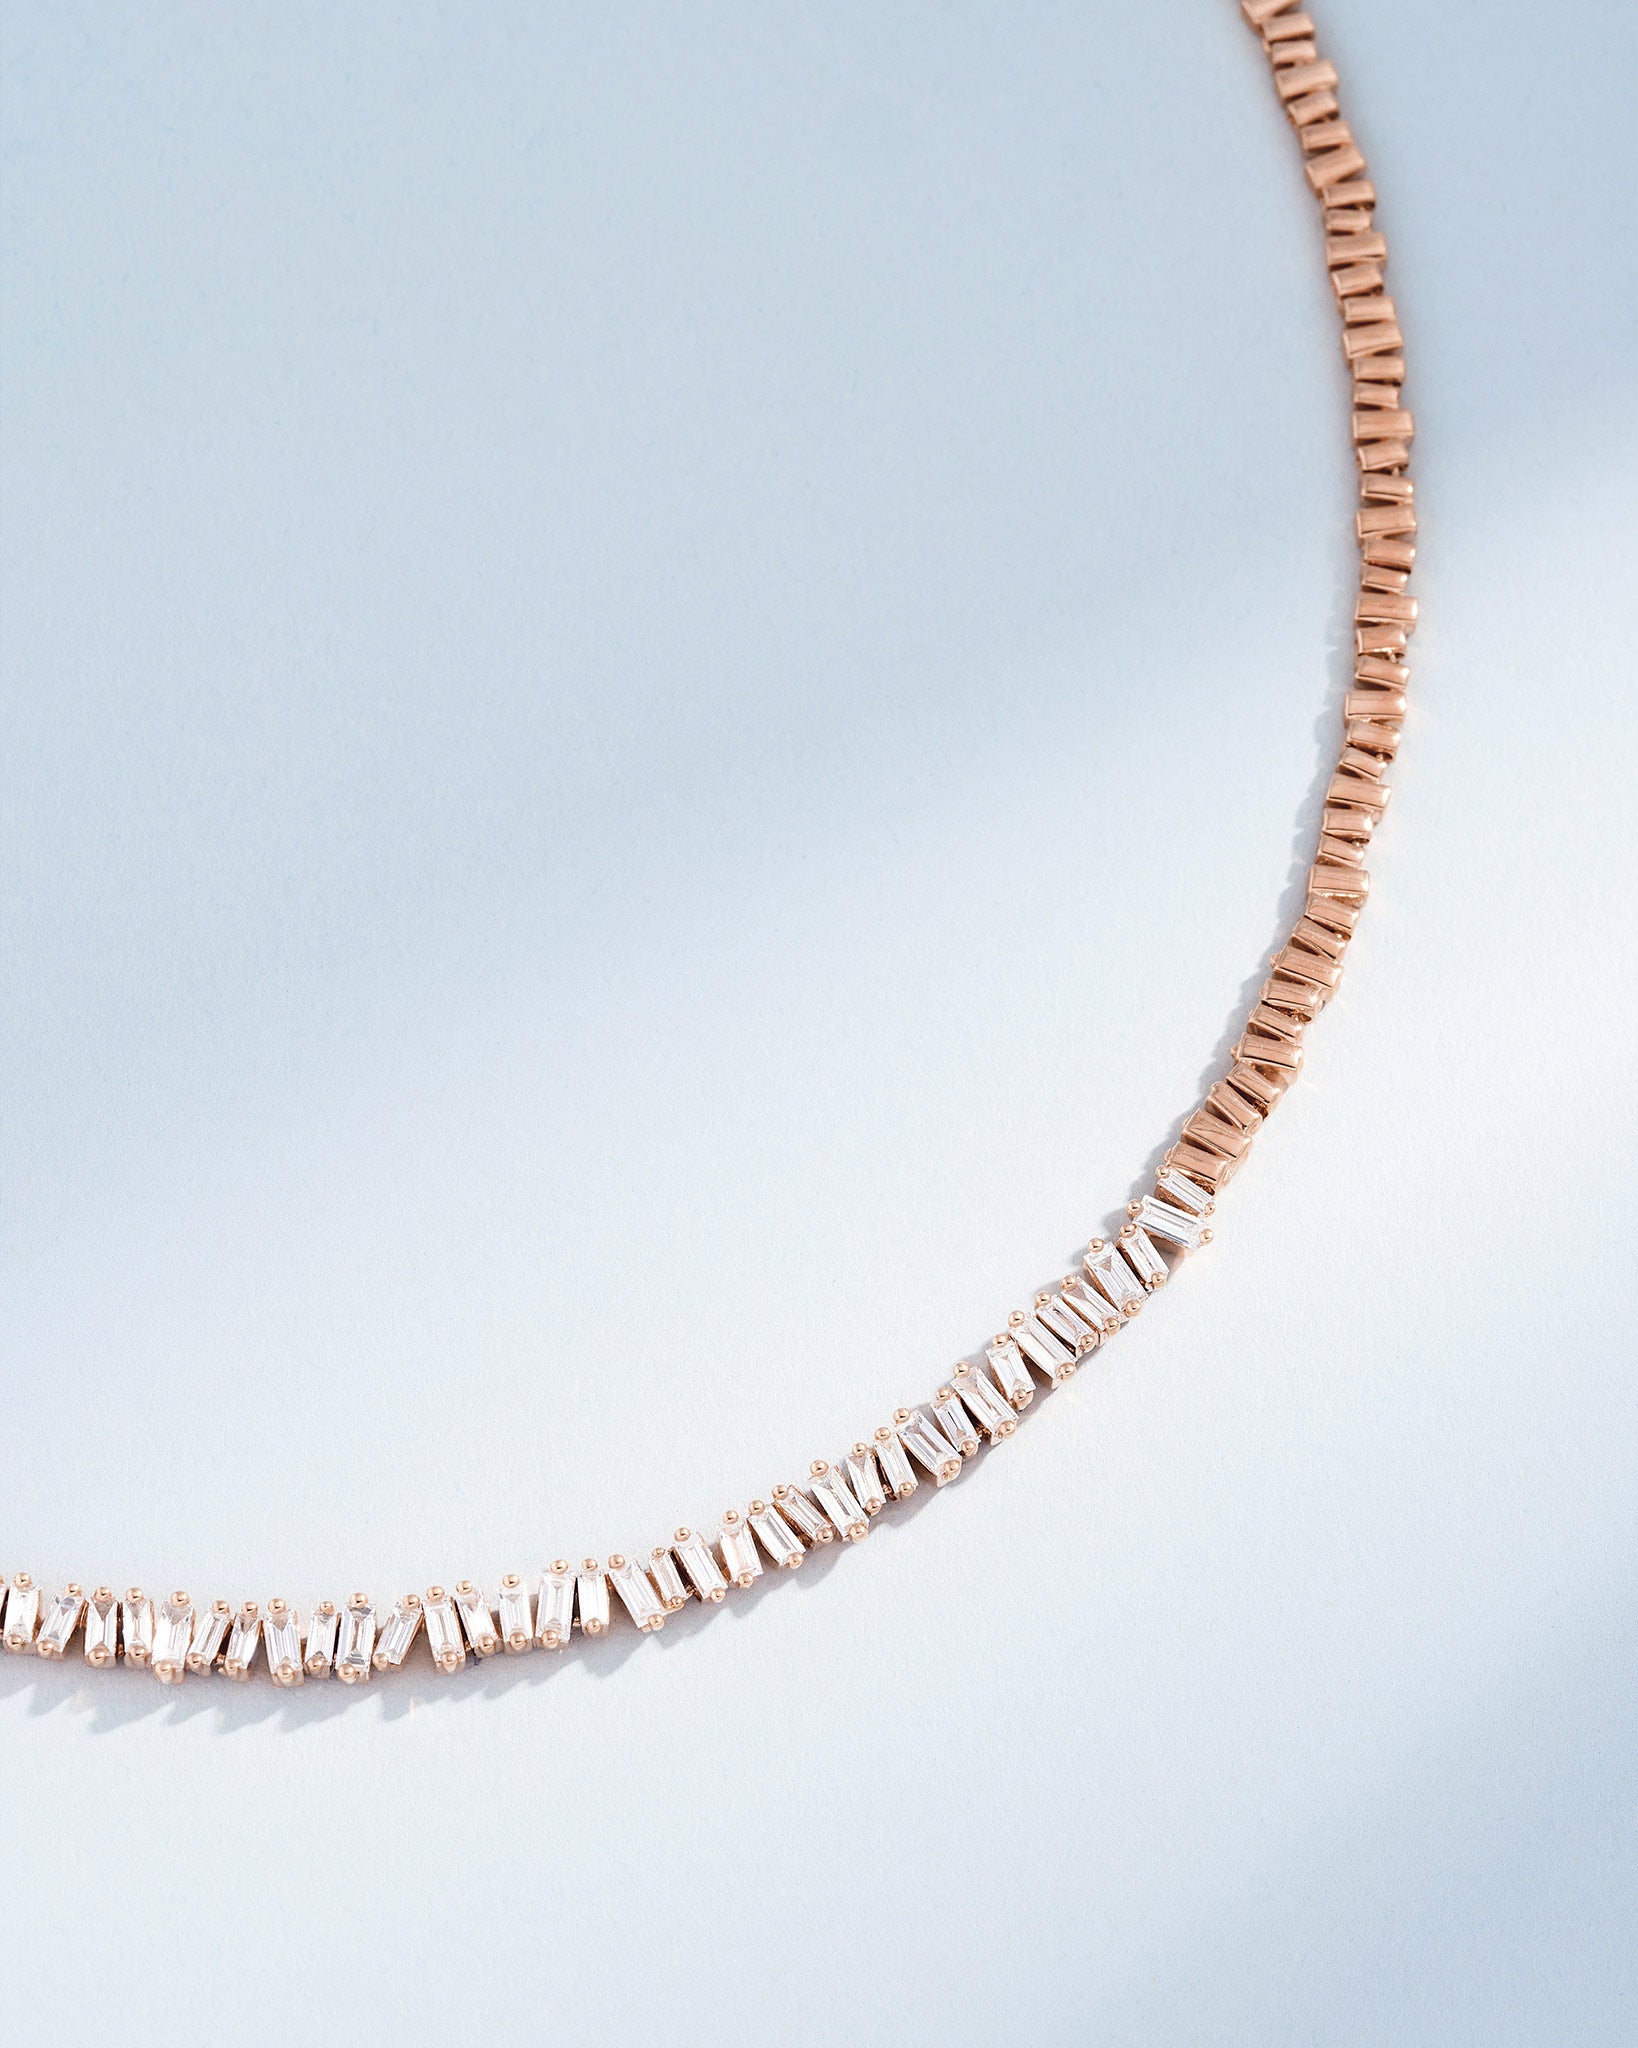 Suzanne Kalan Classic Diamond Tennis Necklace in 18k rose gold